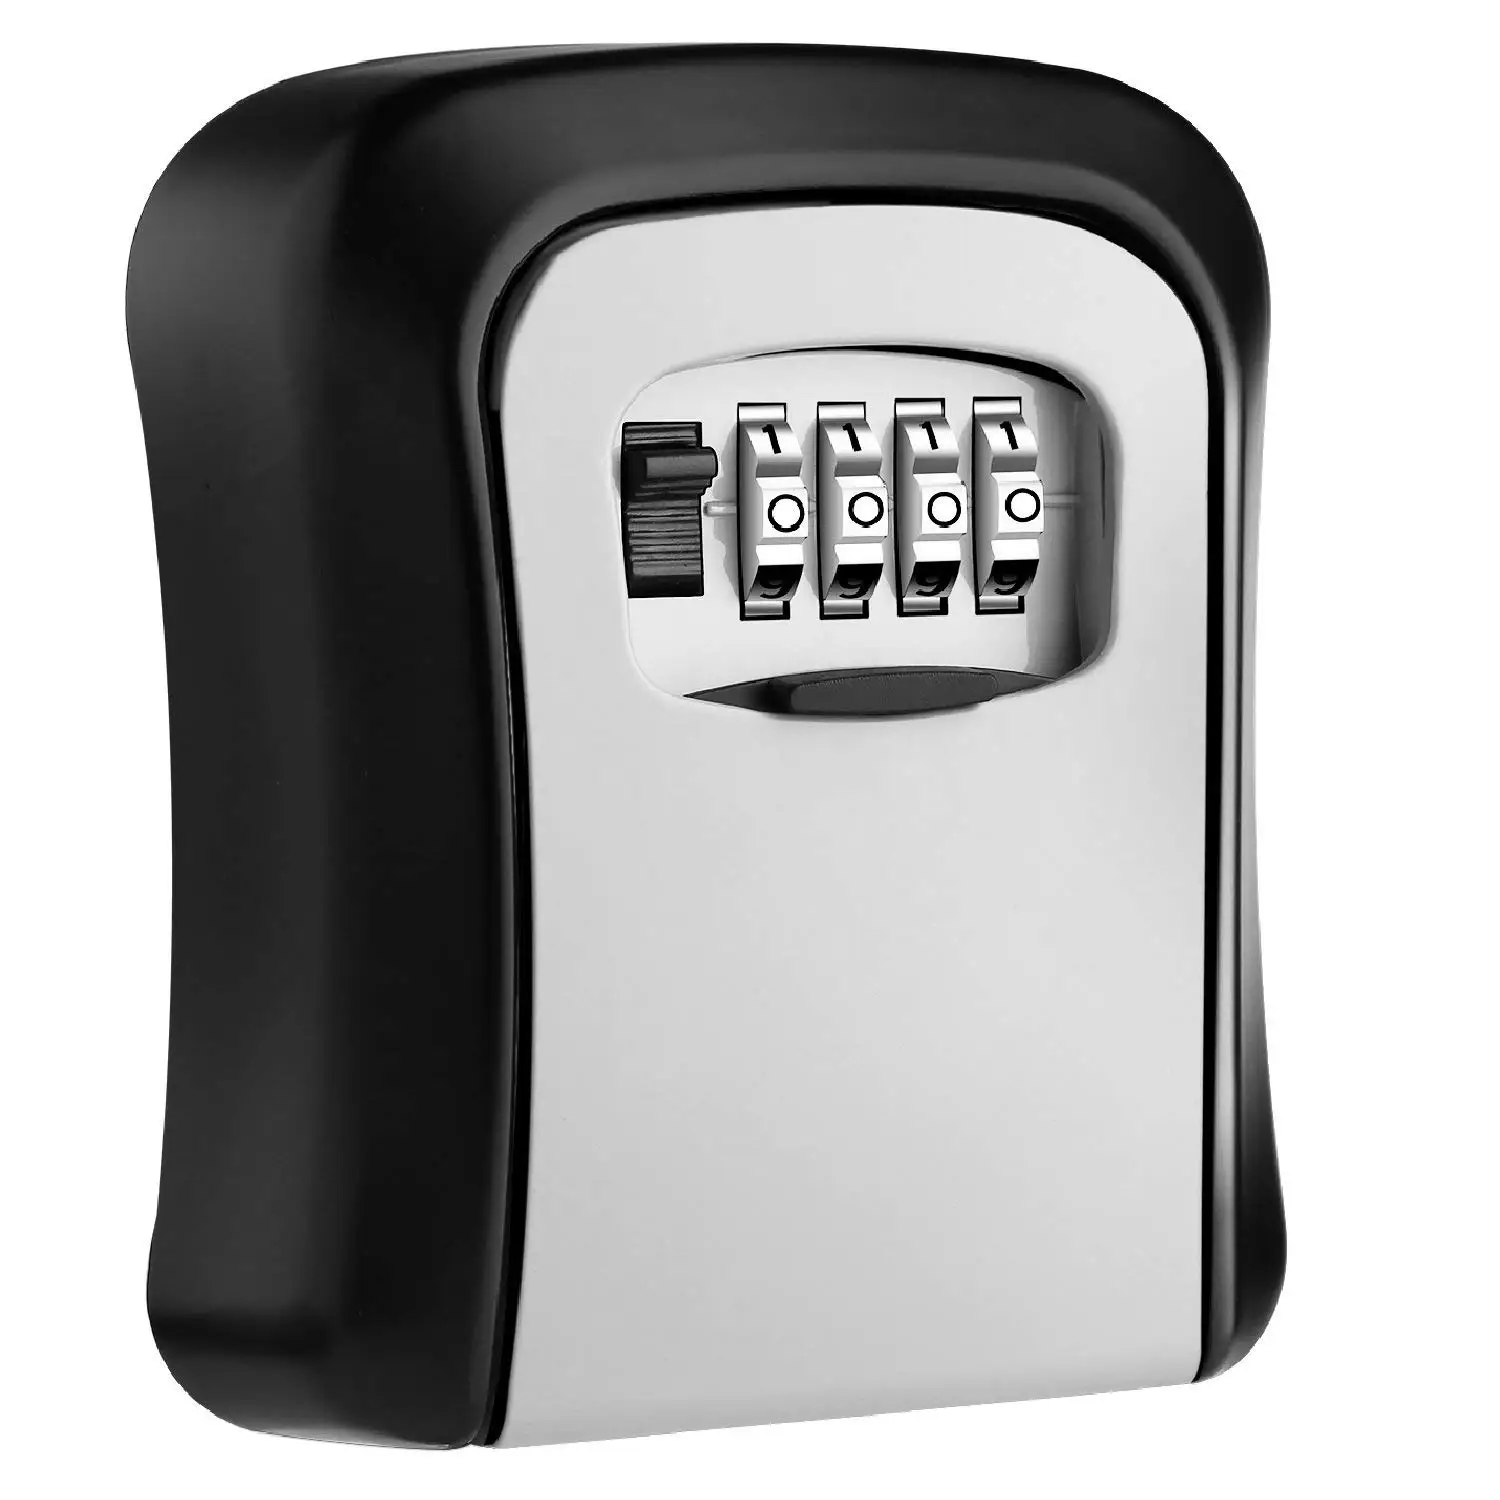 Safe Box Outdoor Wall Mounted 4 Digit Combination Key Lock Storage Security Home 